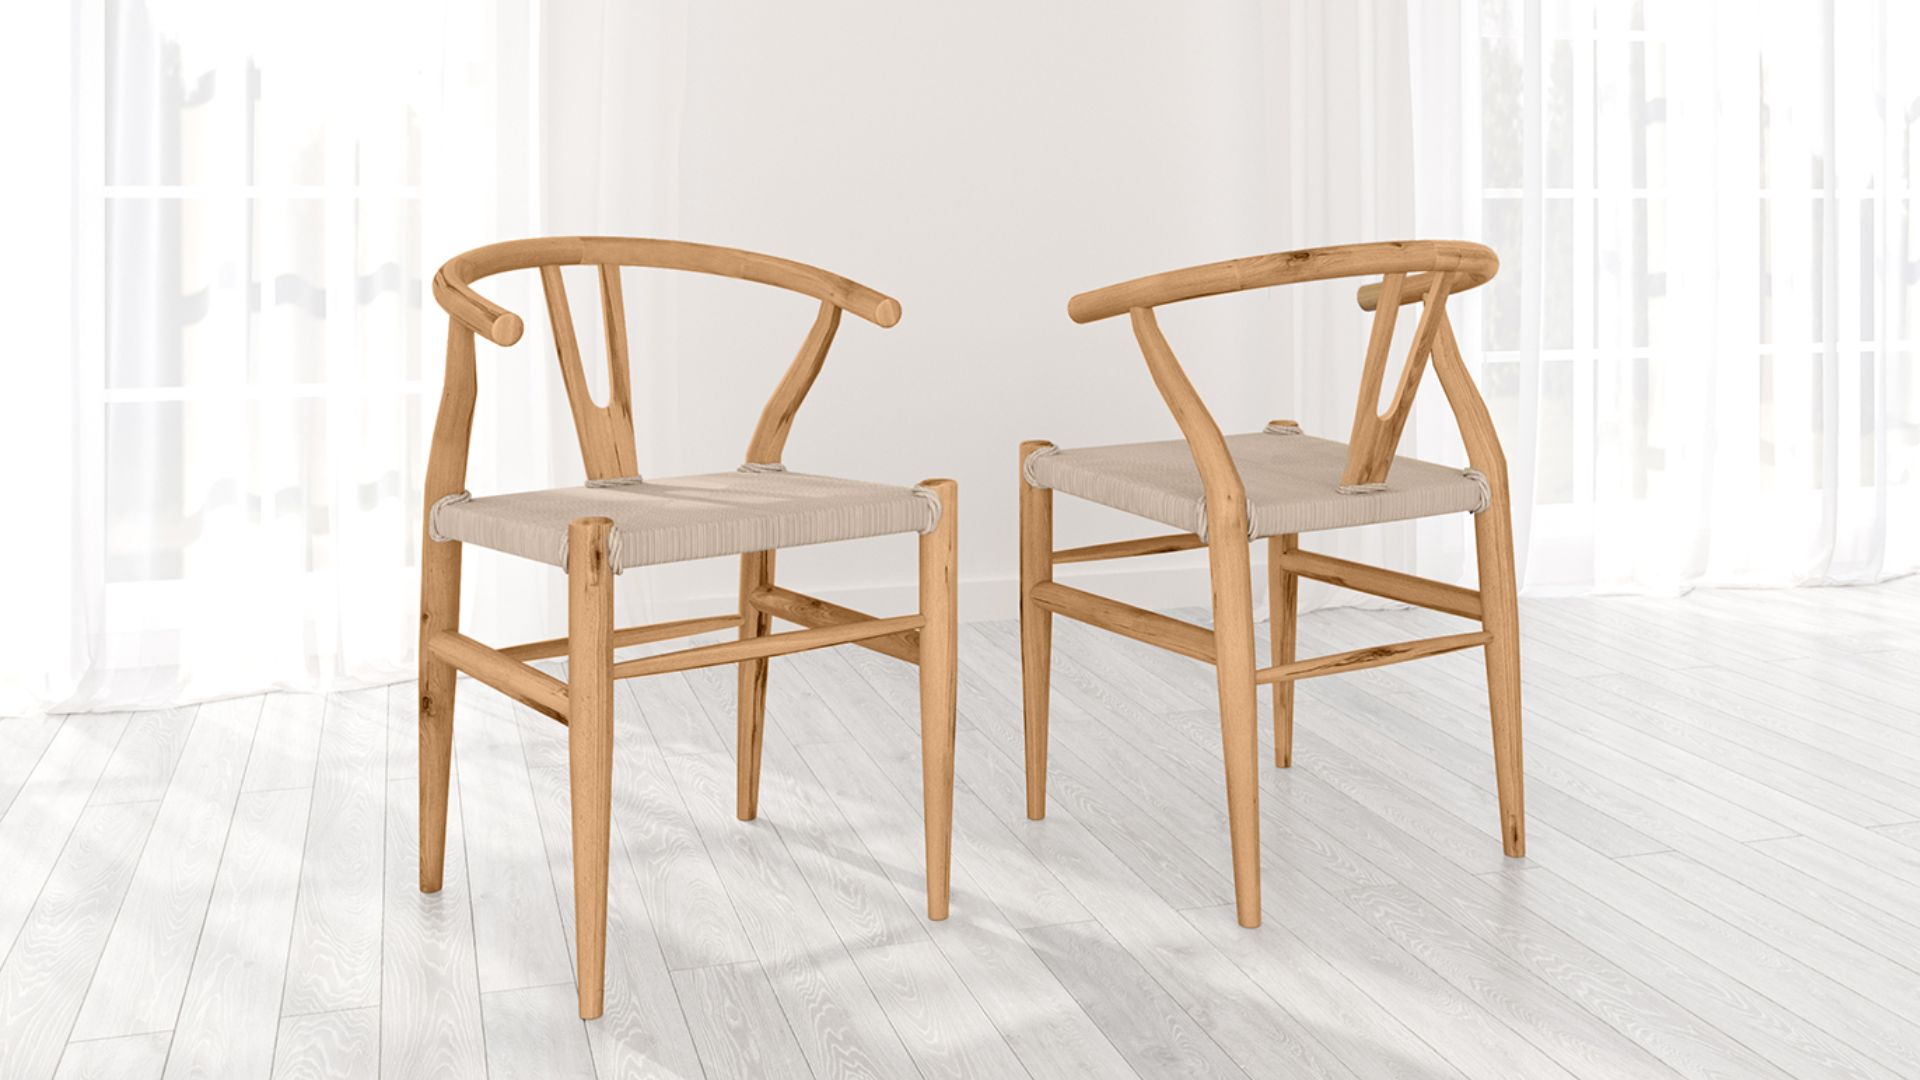 Wall Product Rendering for Beige Kitchen Chairs